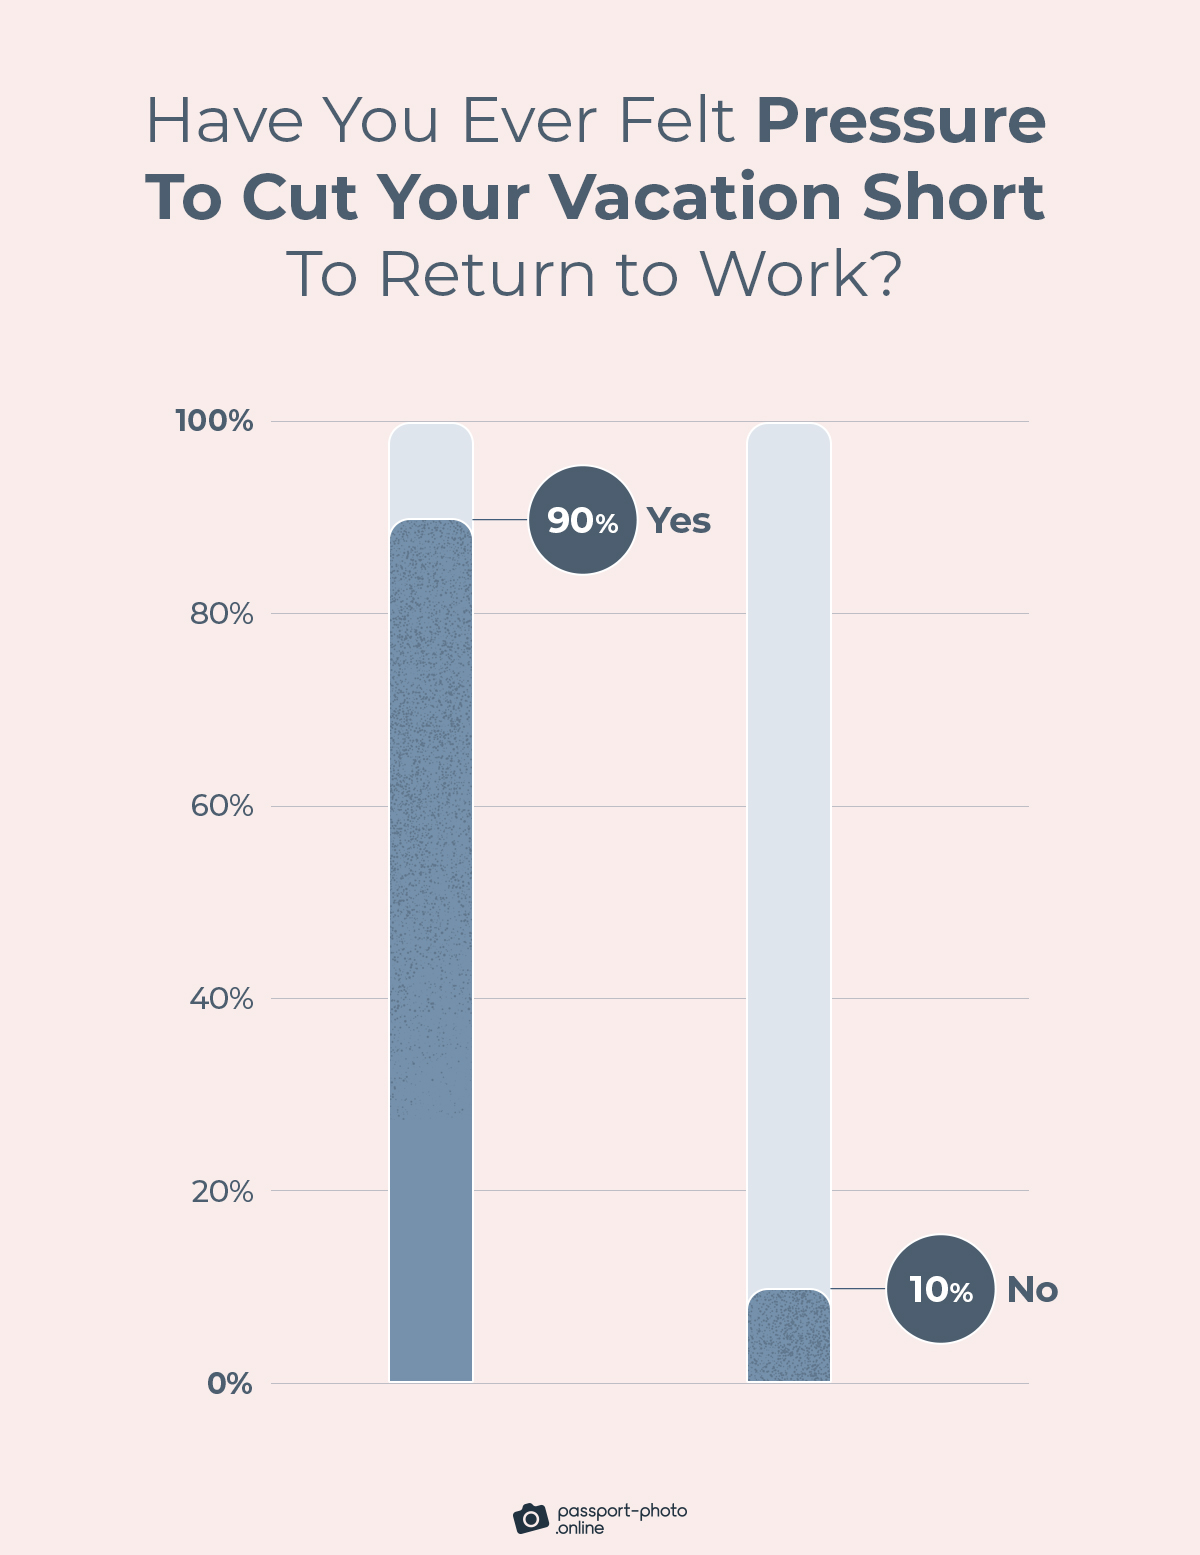 90% of US employees have felt pressure to cut their vacation short to return to work at least once in their lifetime